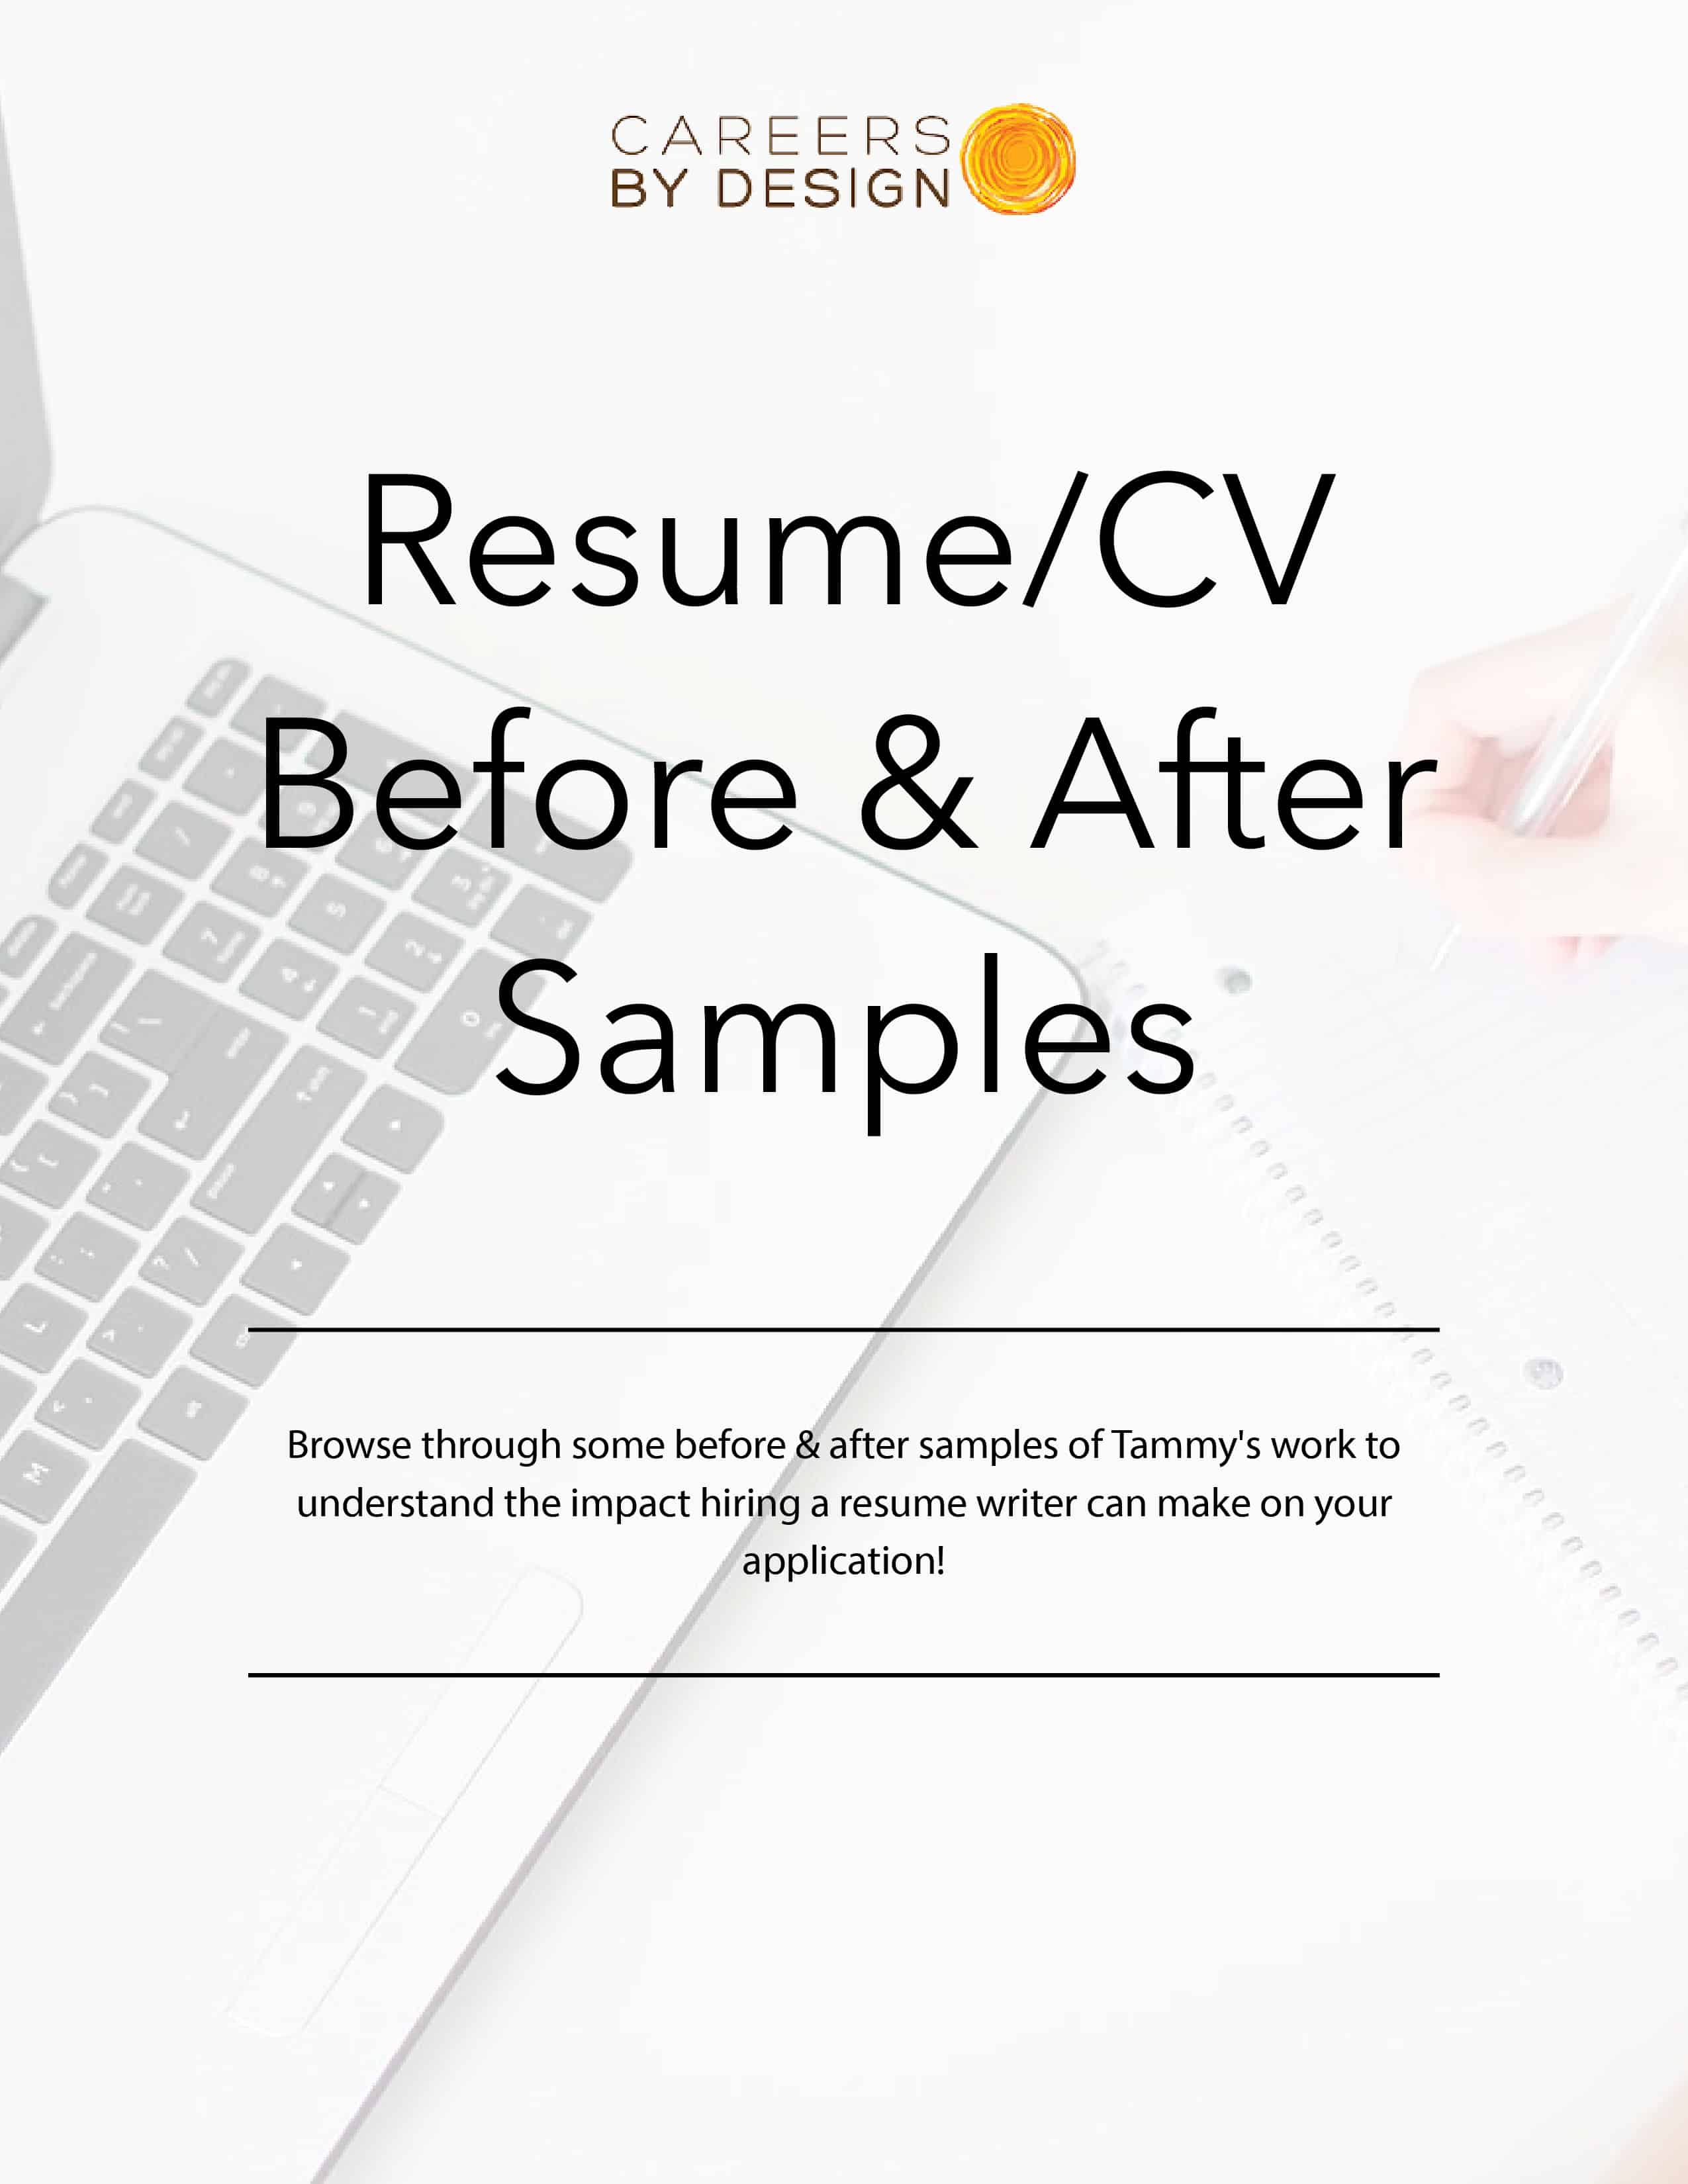 Professional Resume Writing Services London Ontario Covering Letters CVs (Curriculum Vitae)